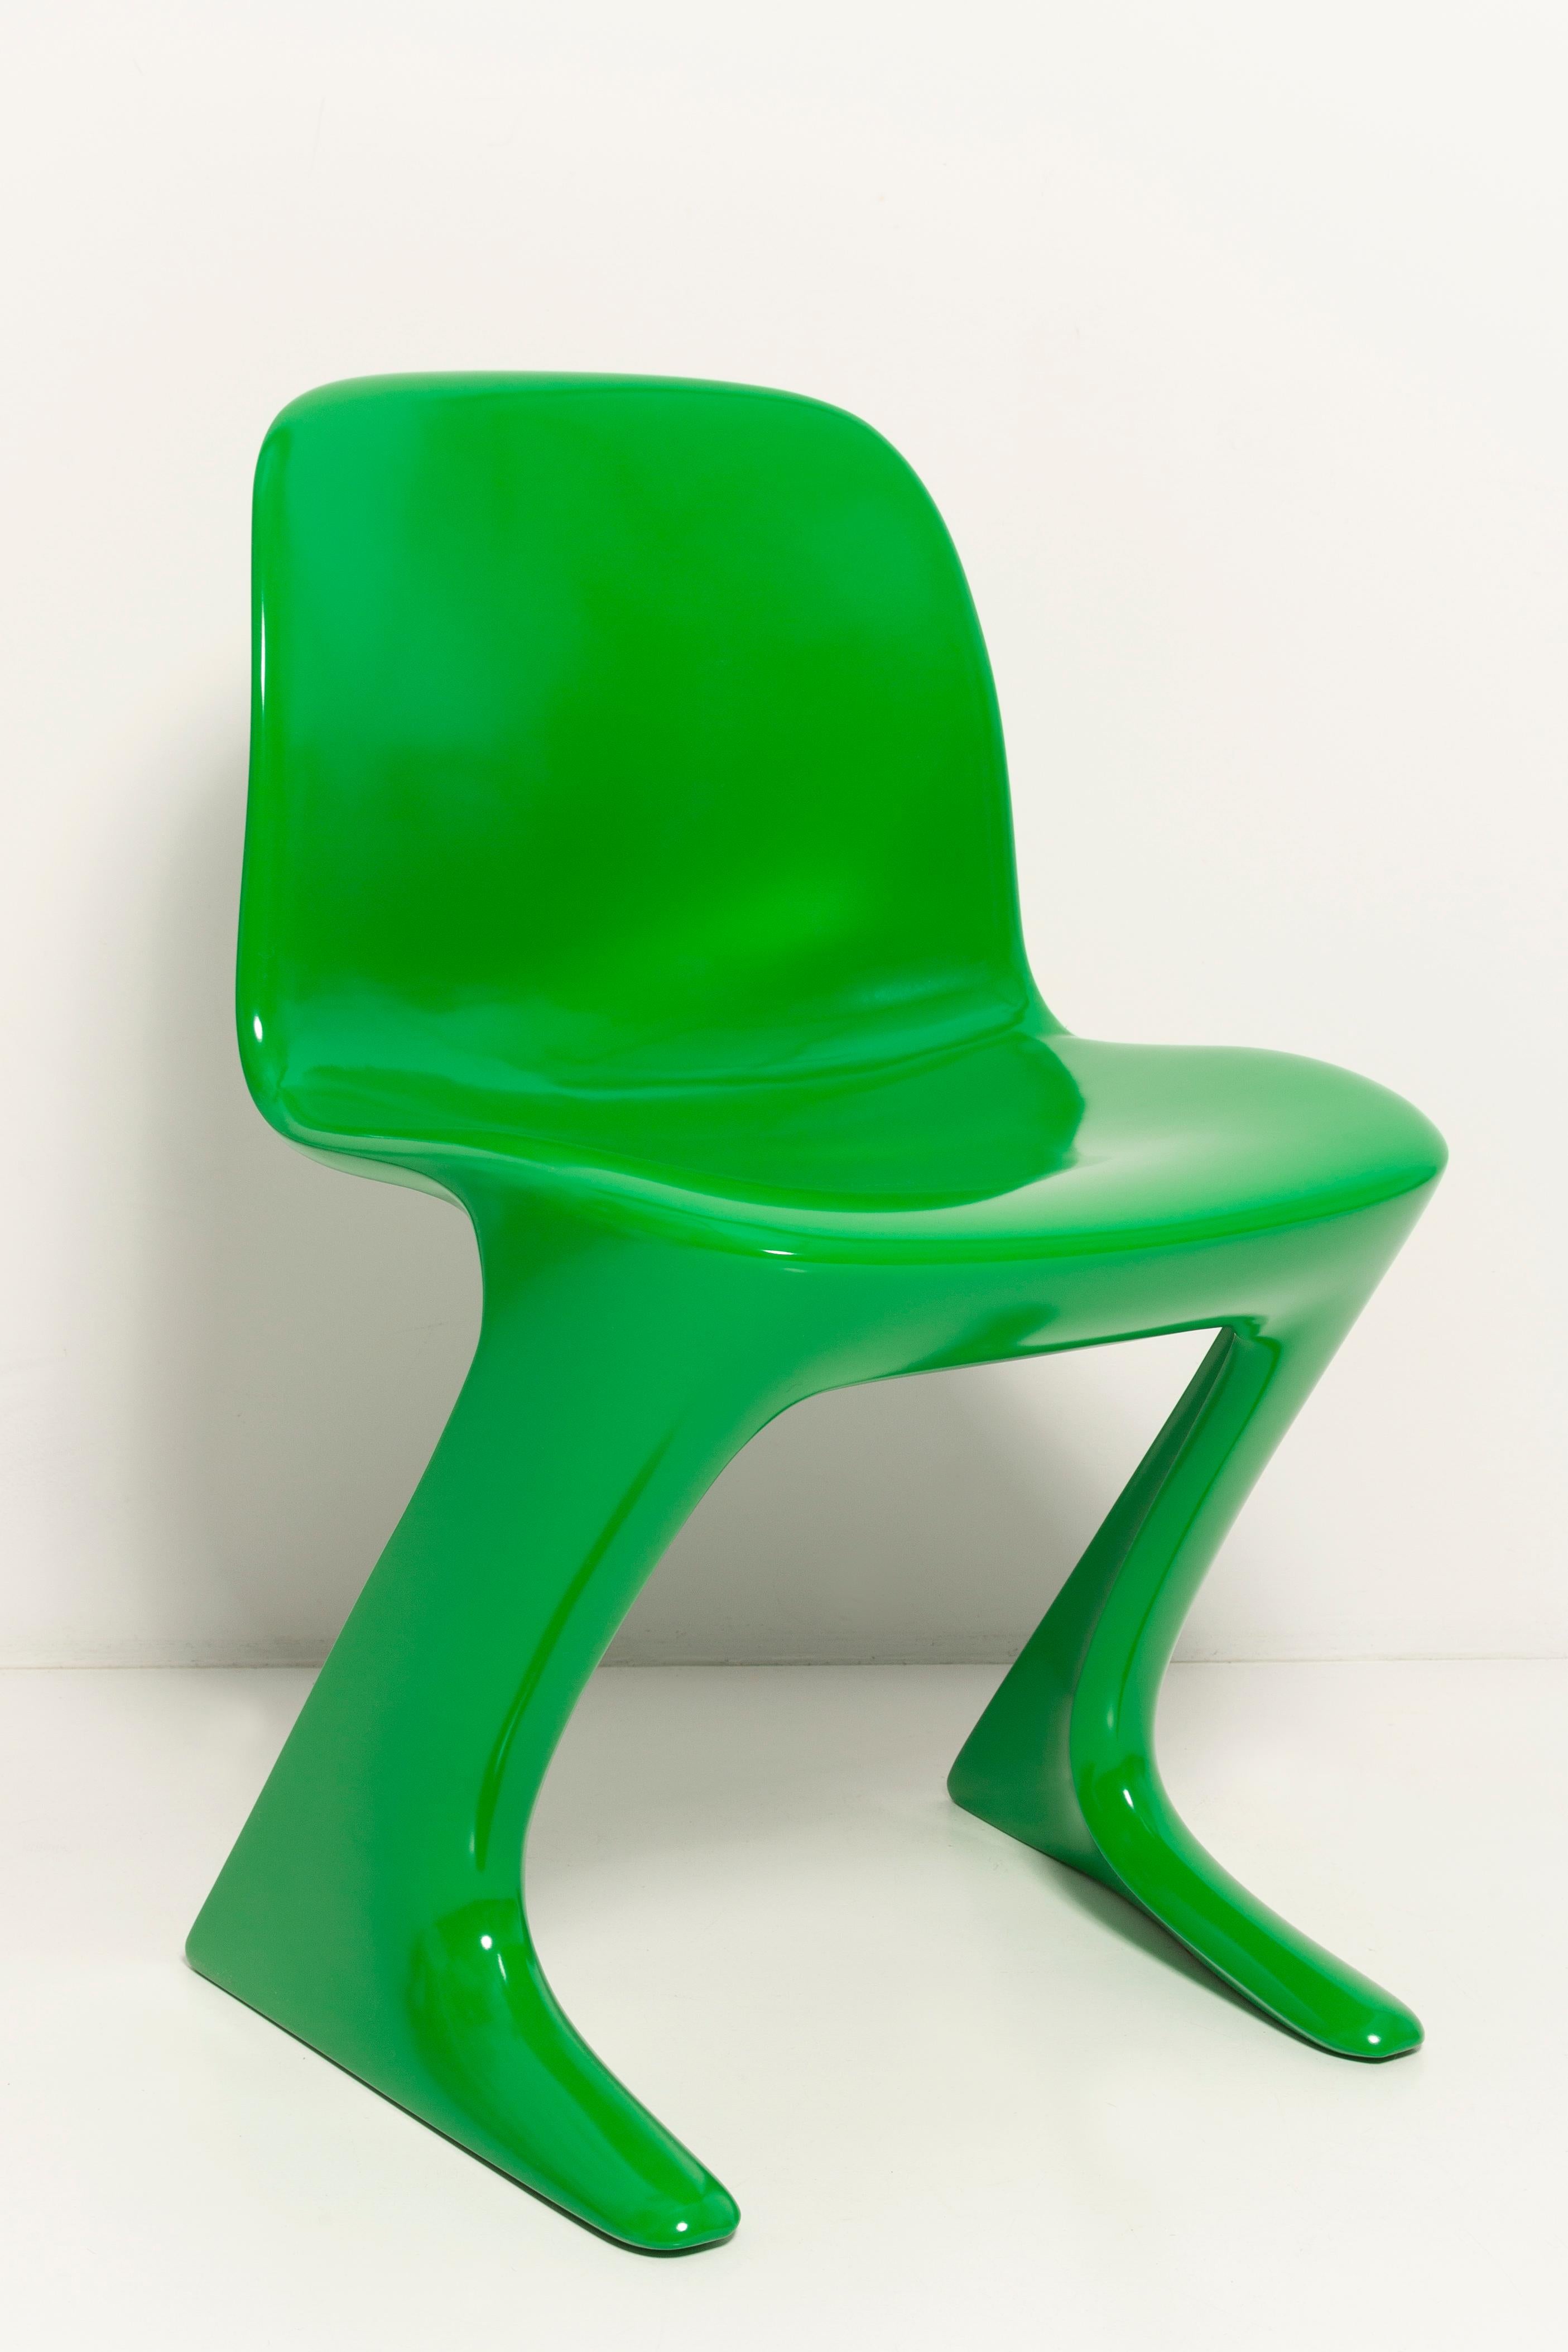 Lacquered Set of Eight Green Kangaroo Chairs Designed by Ernst Moeckl, Germany, 1960s For Sale